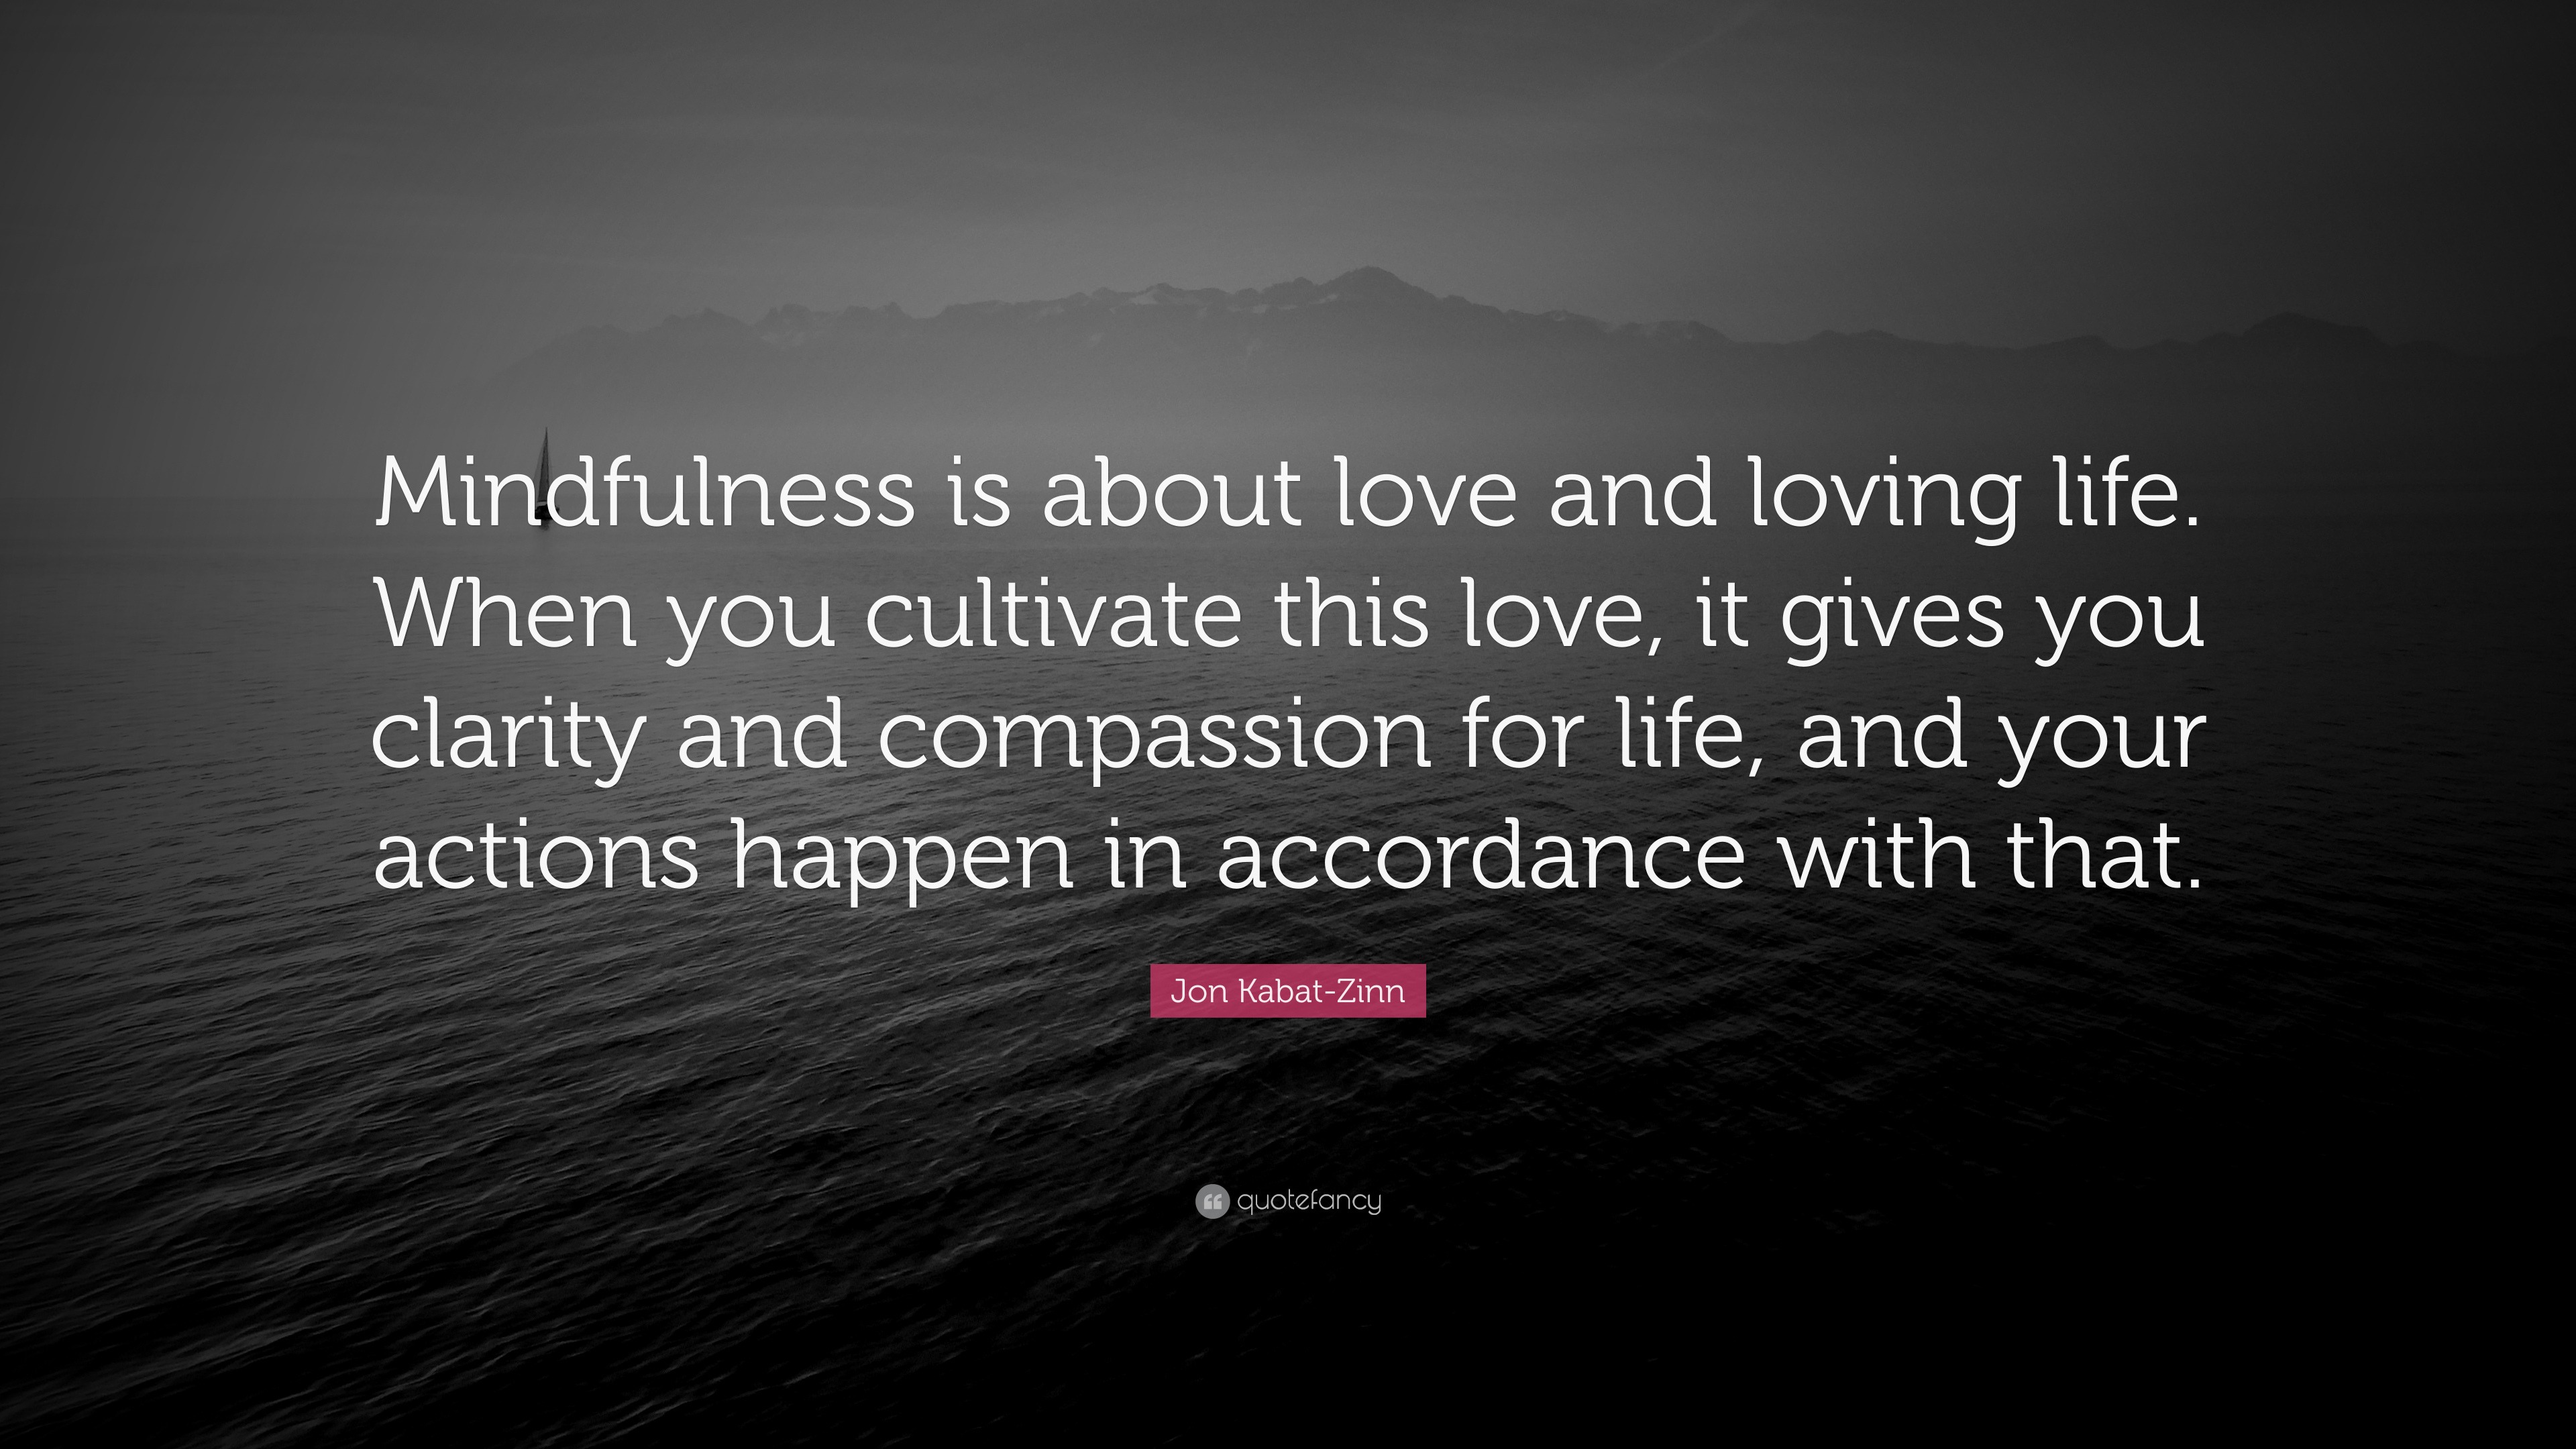 Jon Kabat-Zinn Quote: “Mindfulness is about love and loving life. When ...